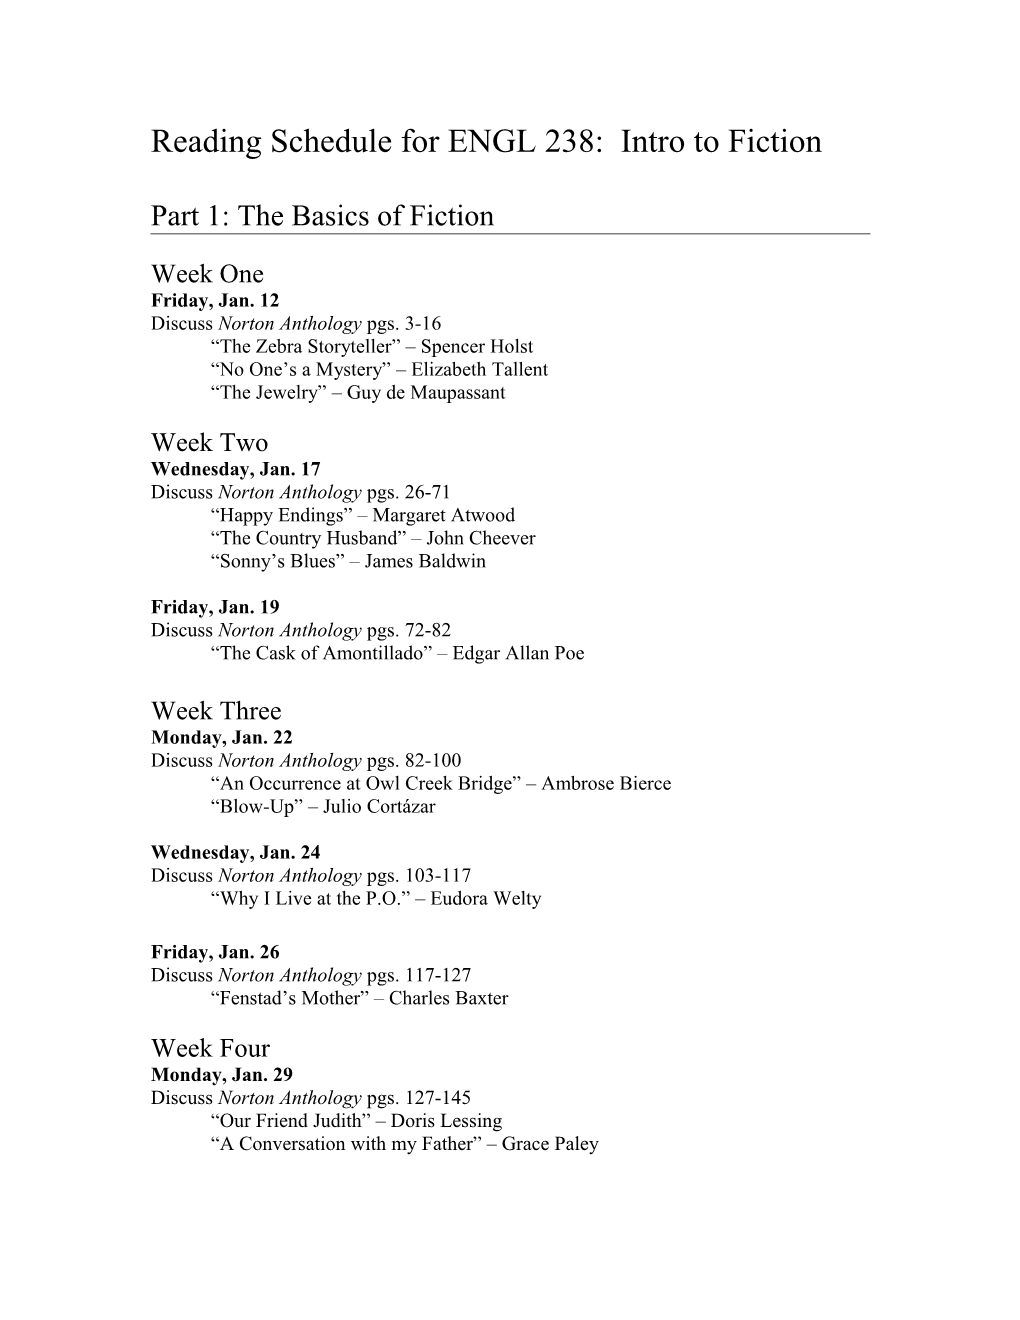 Reading Schedule for ENGL 238: Intro to Fiction